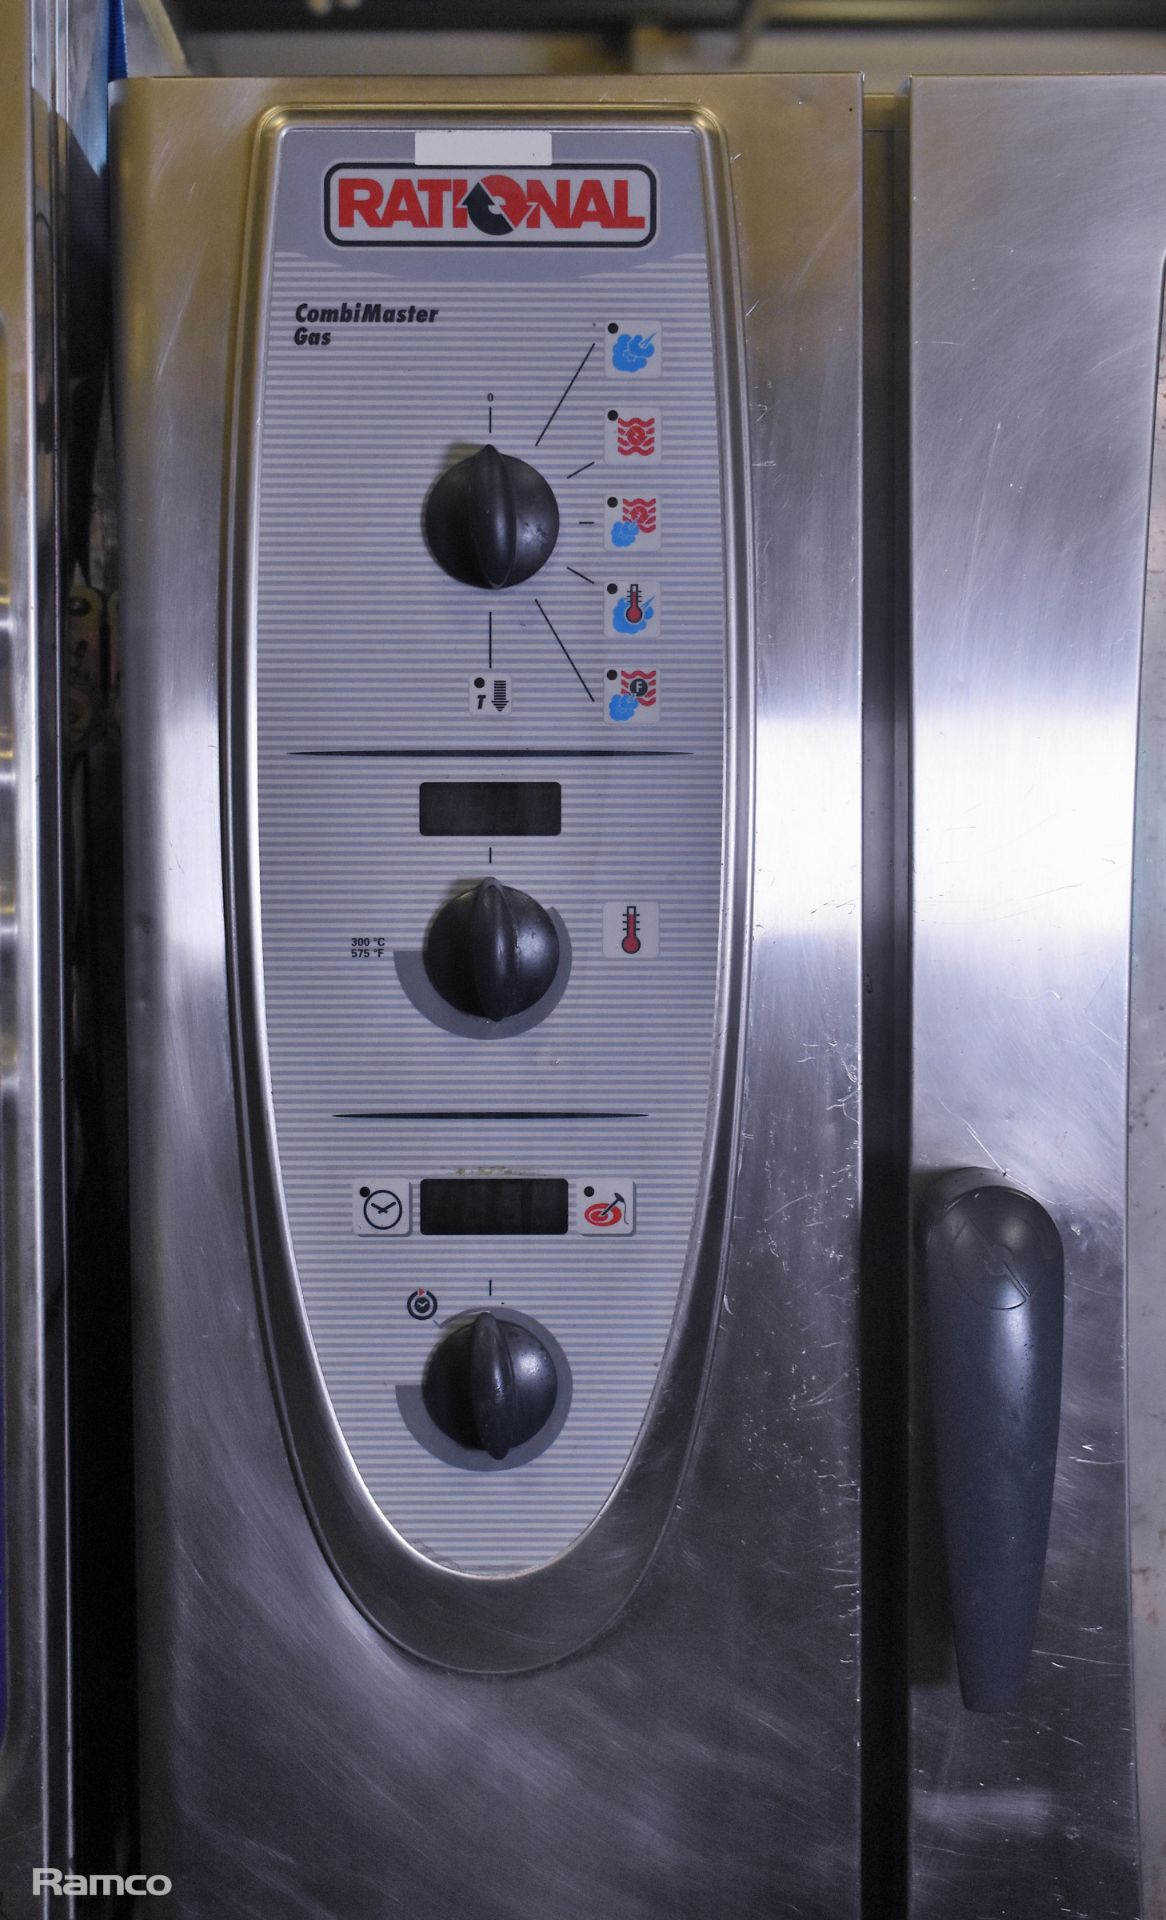 Rational CombiMaster CM 101G stainless steel 10 grid combi oven on stainless steel stand - Image 6 of 7